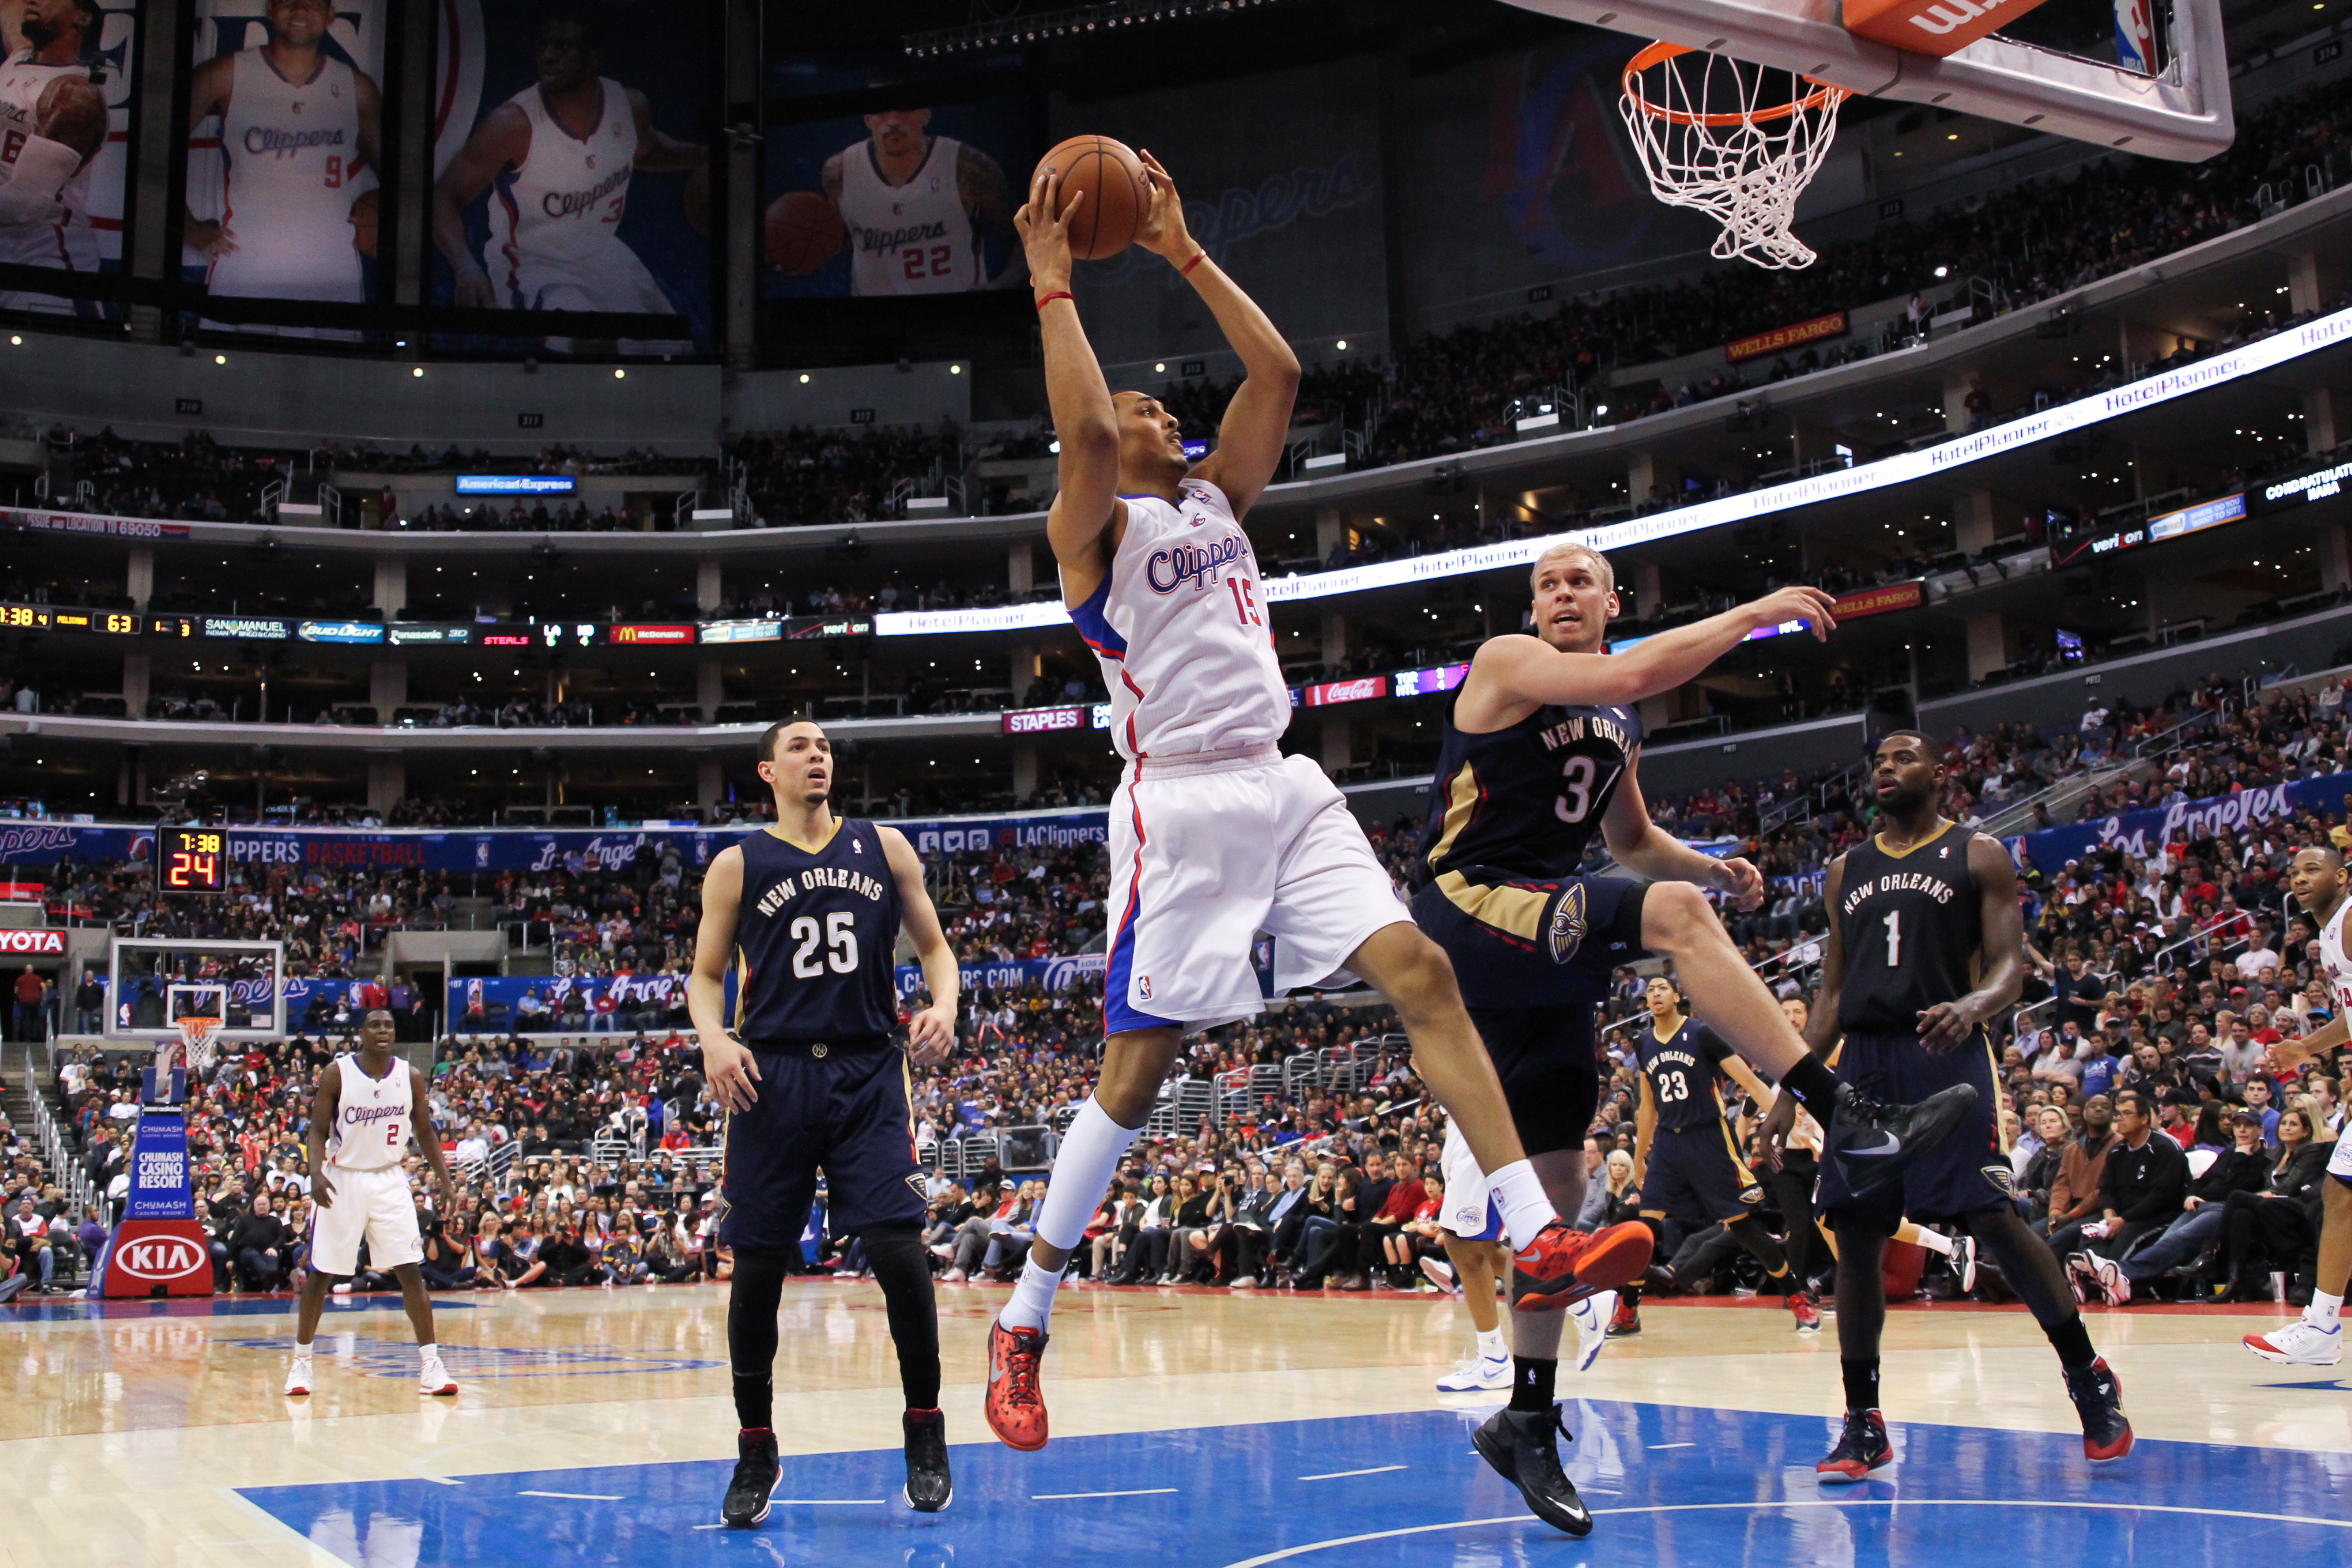 CLIPPERS VS. PELICANS 3.1.14 [GAME PHOTOS] — Ryan Hollins